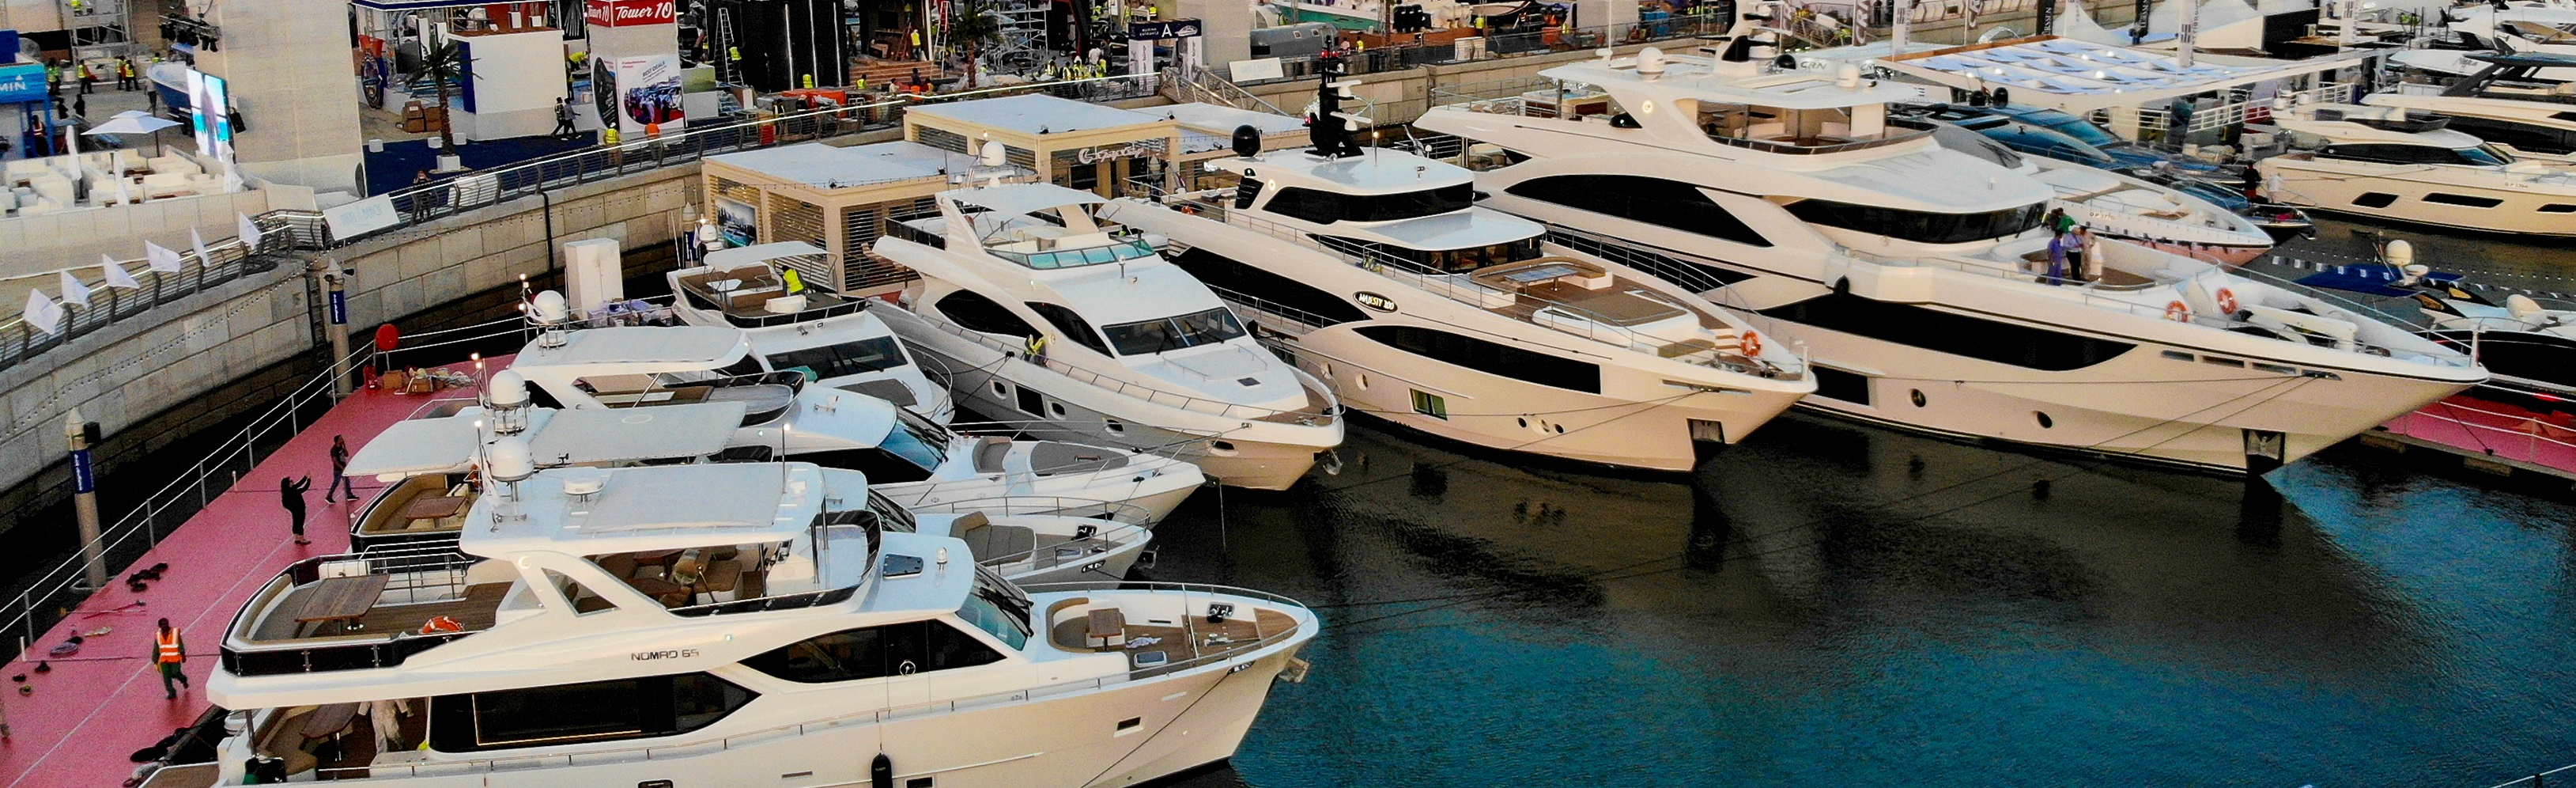 Gulf-Craft's-Yachts-and-Boats-at-the-Dubai-International-Boat-Show-2018-(4)